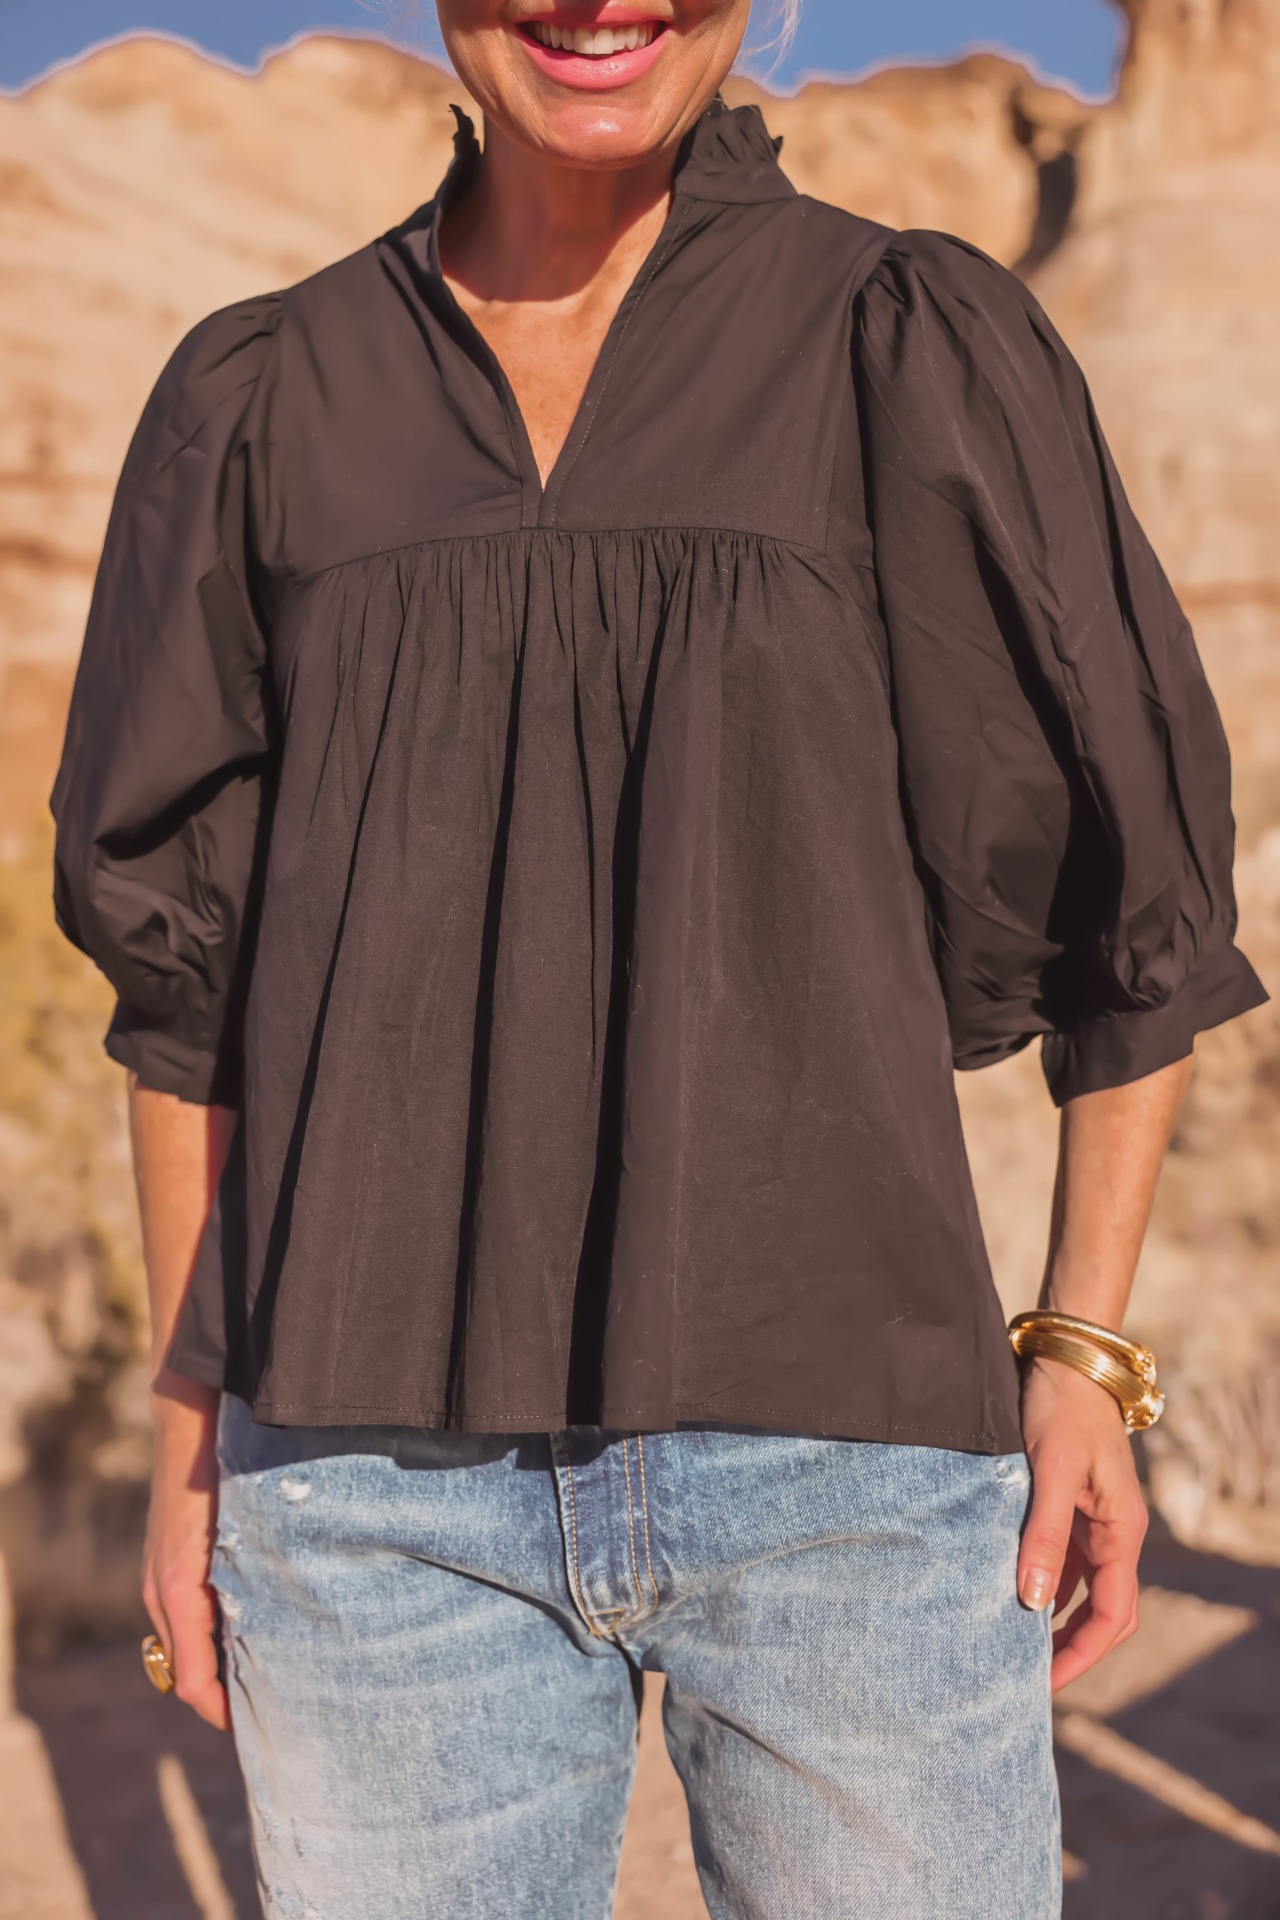 Cotton Poplin Top | Tops That Cover Arms